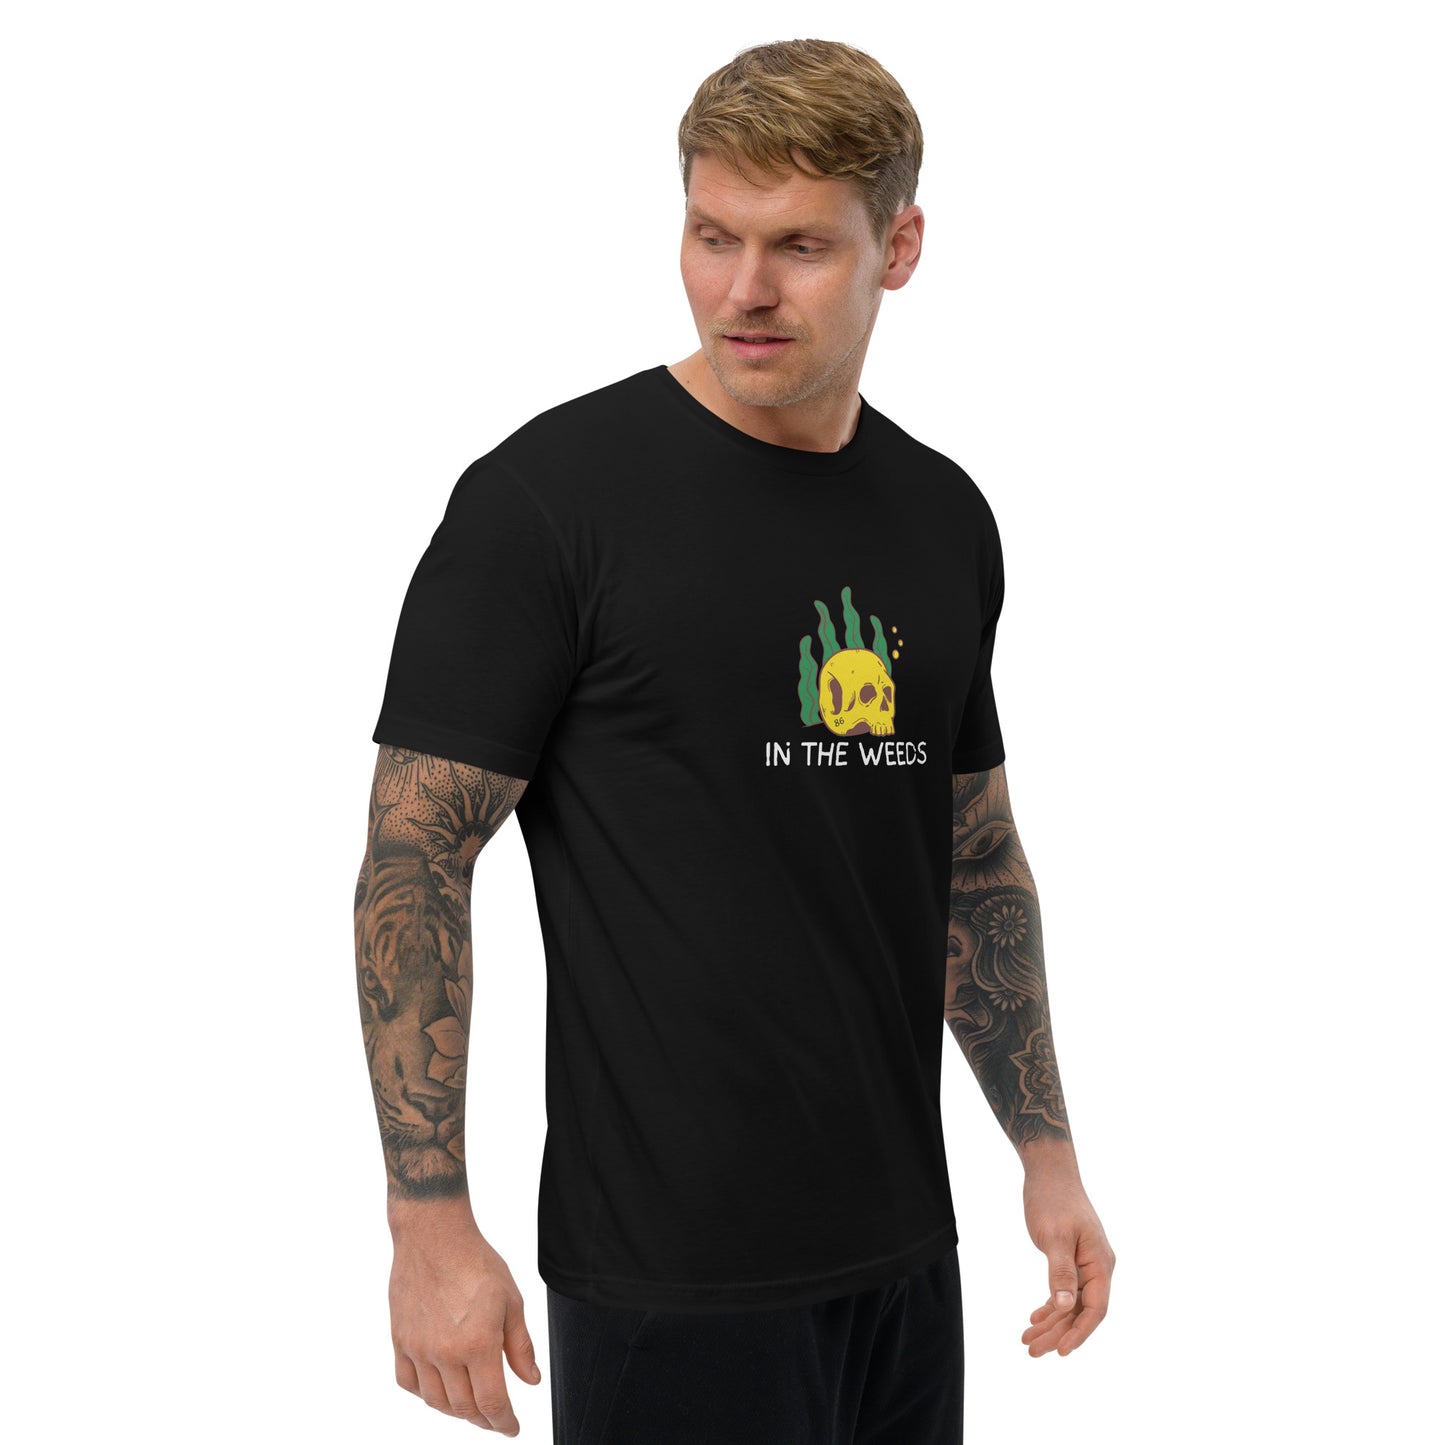 IN THE WEEDS 2 BLACK Fitted Short Sleeve T-shirt